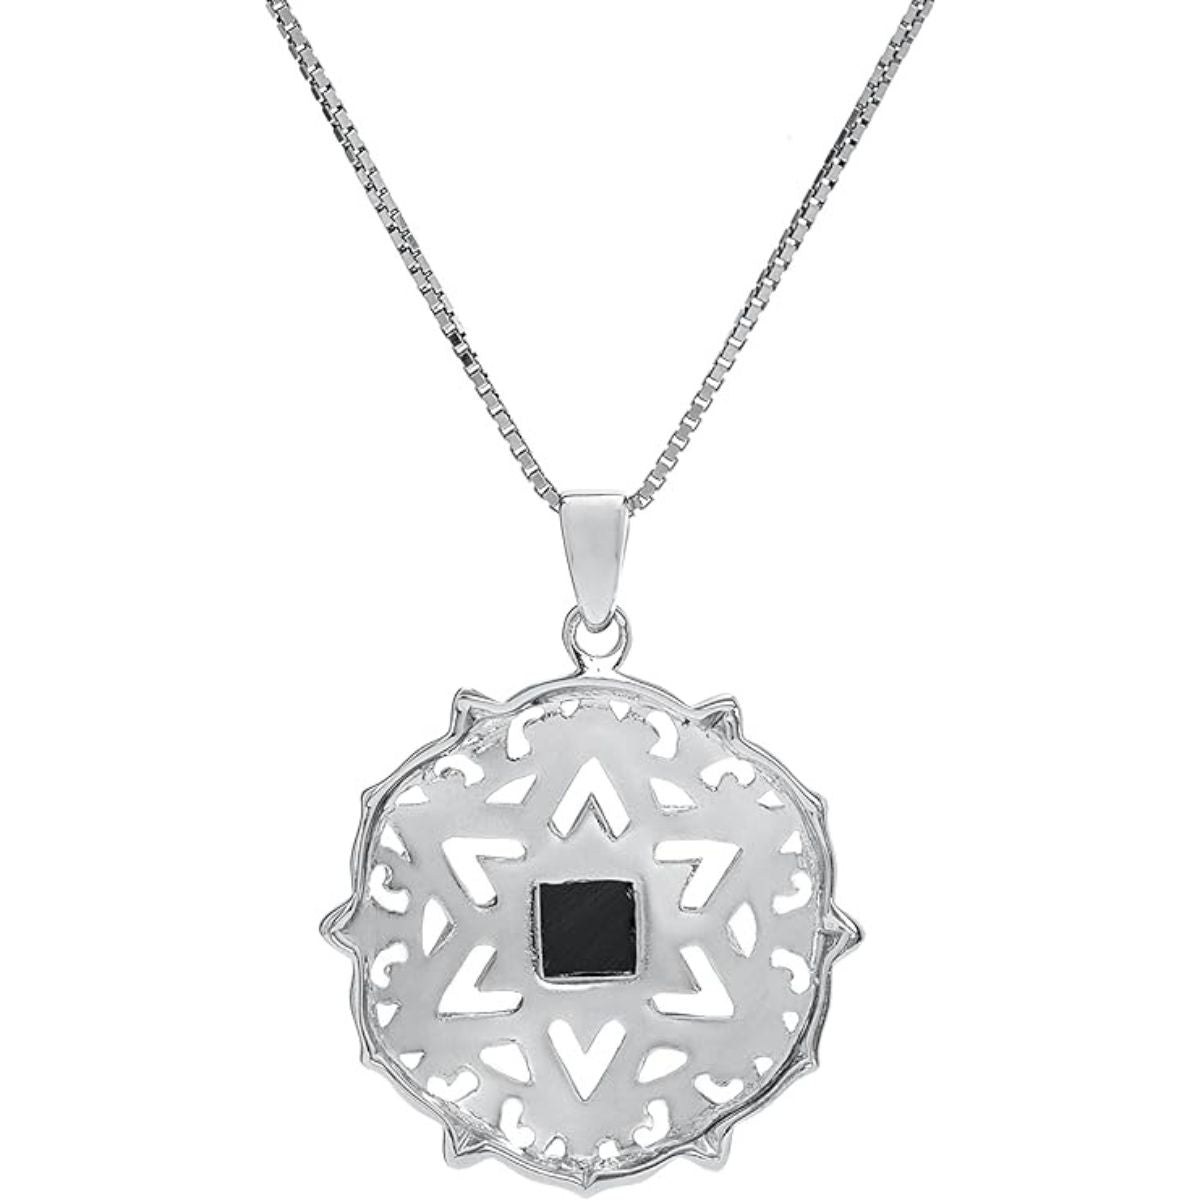 Nano Sim OB Silver and 9K Gold Pendant - Star of David with Floral Decorating From the Holy Land